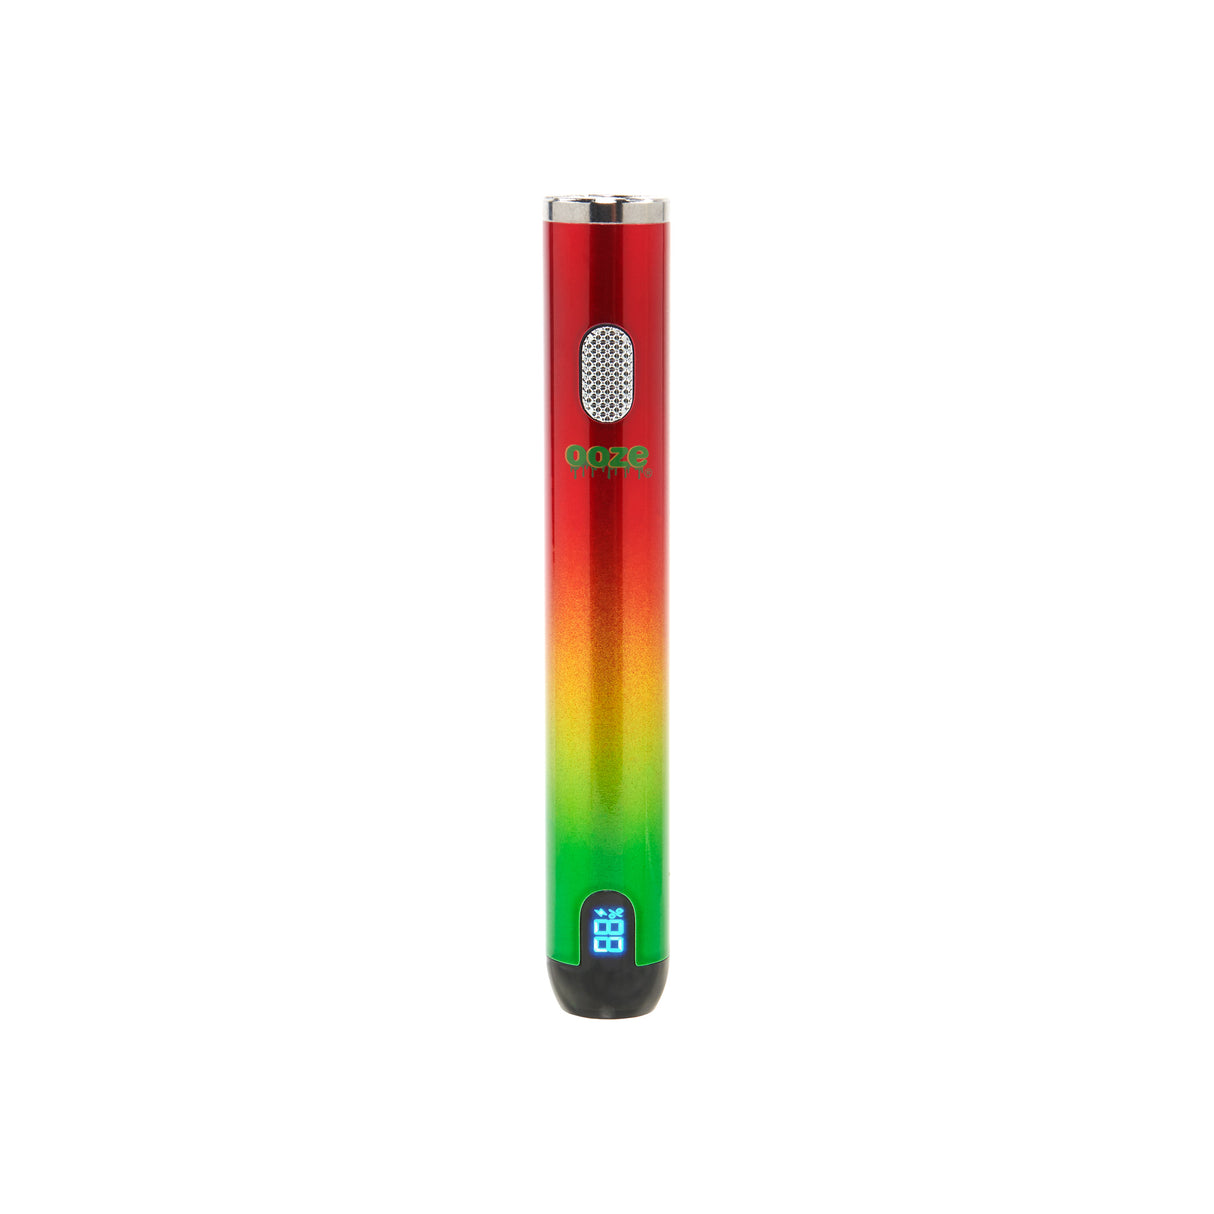 The rasta Ooze Smart Battery is upright and turned on without the charger